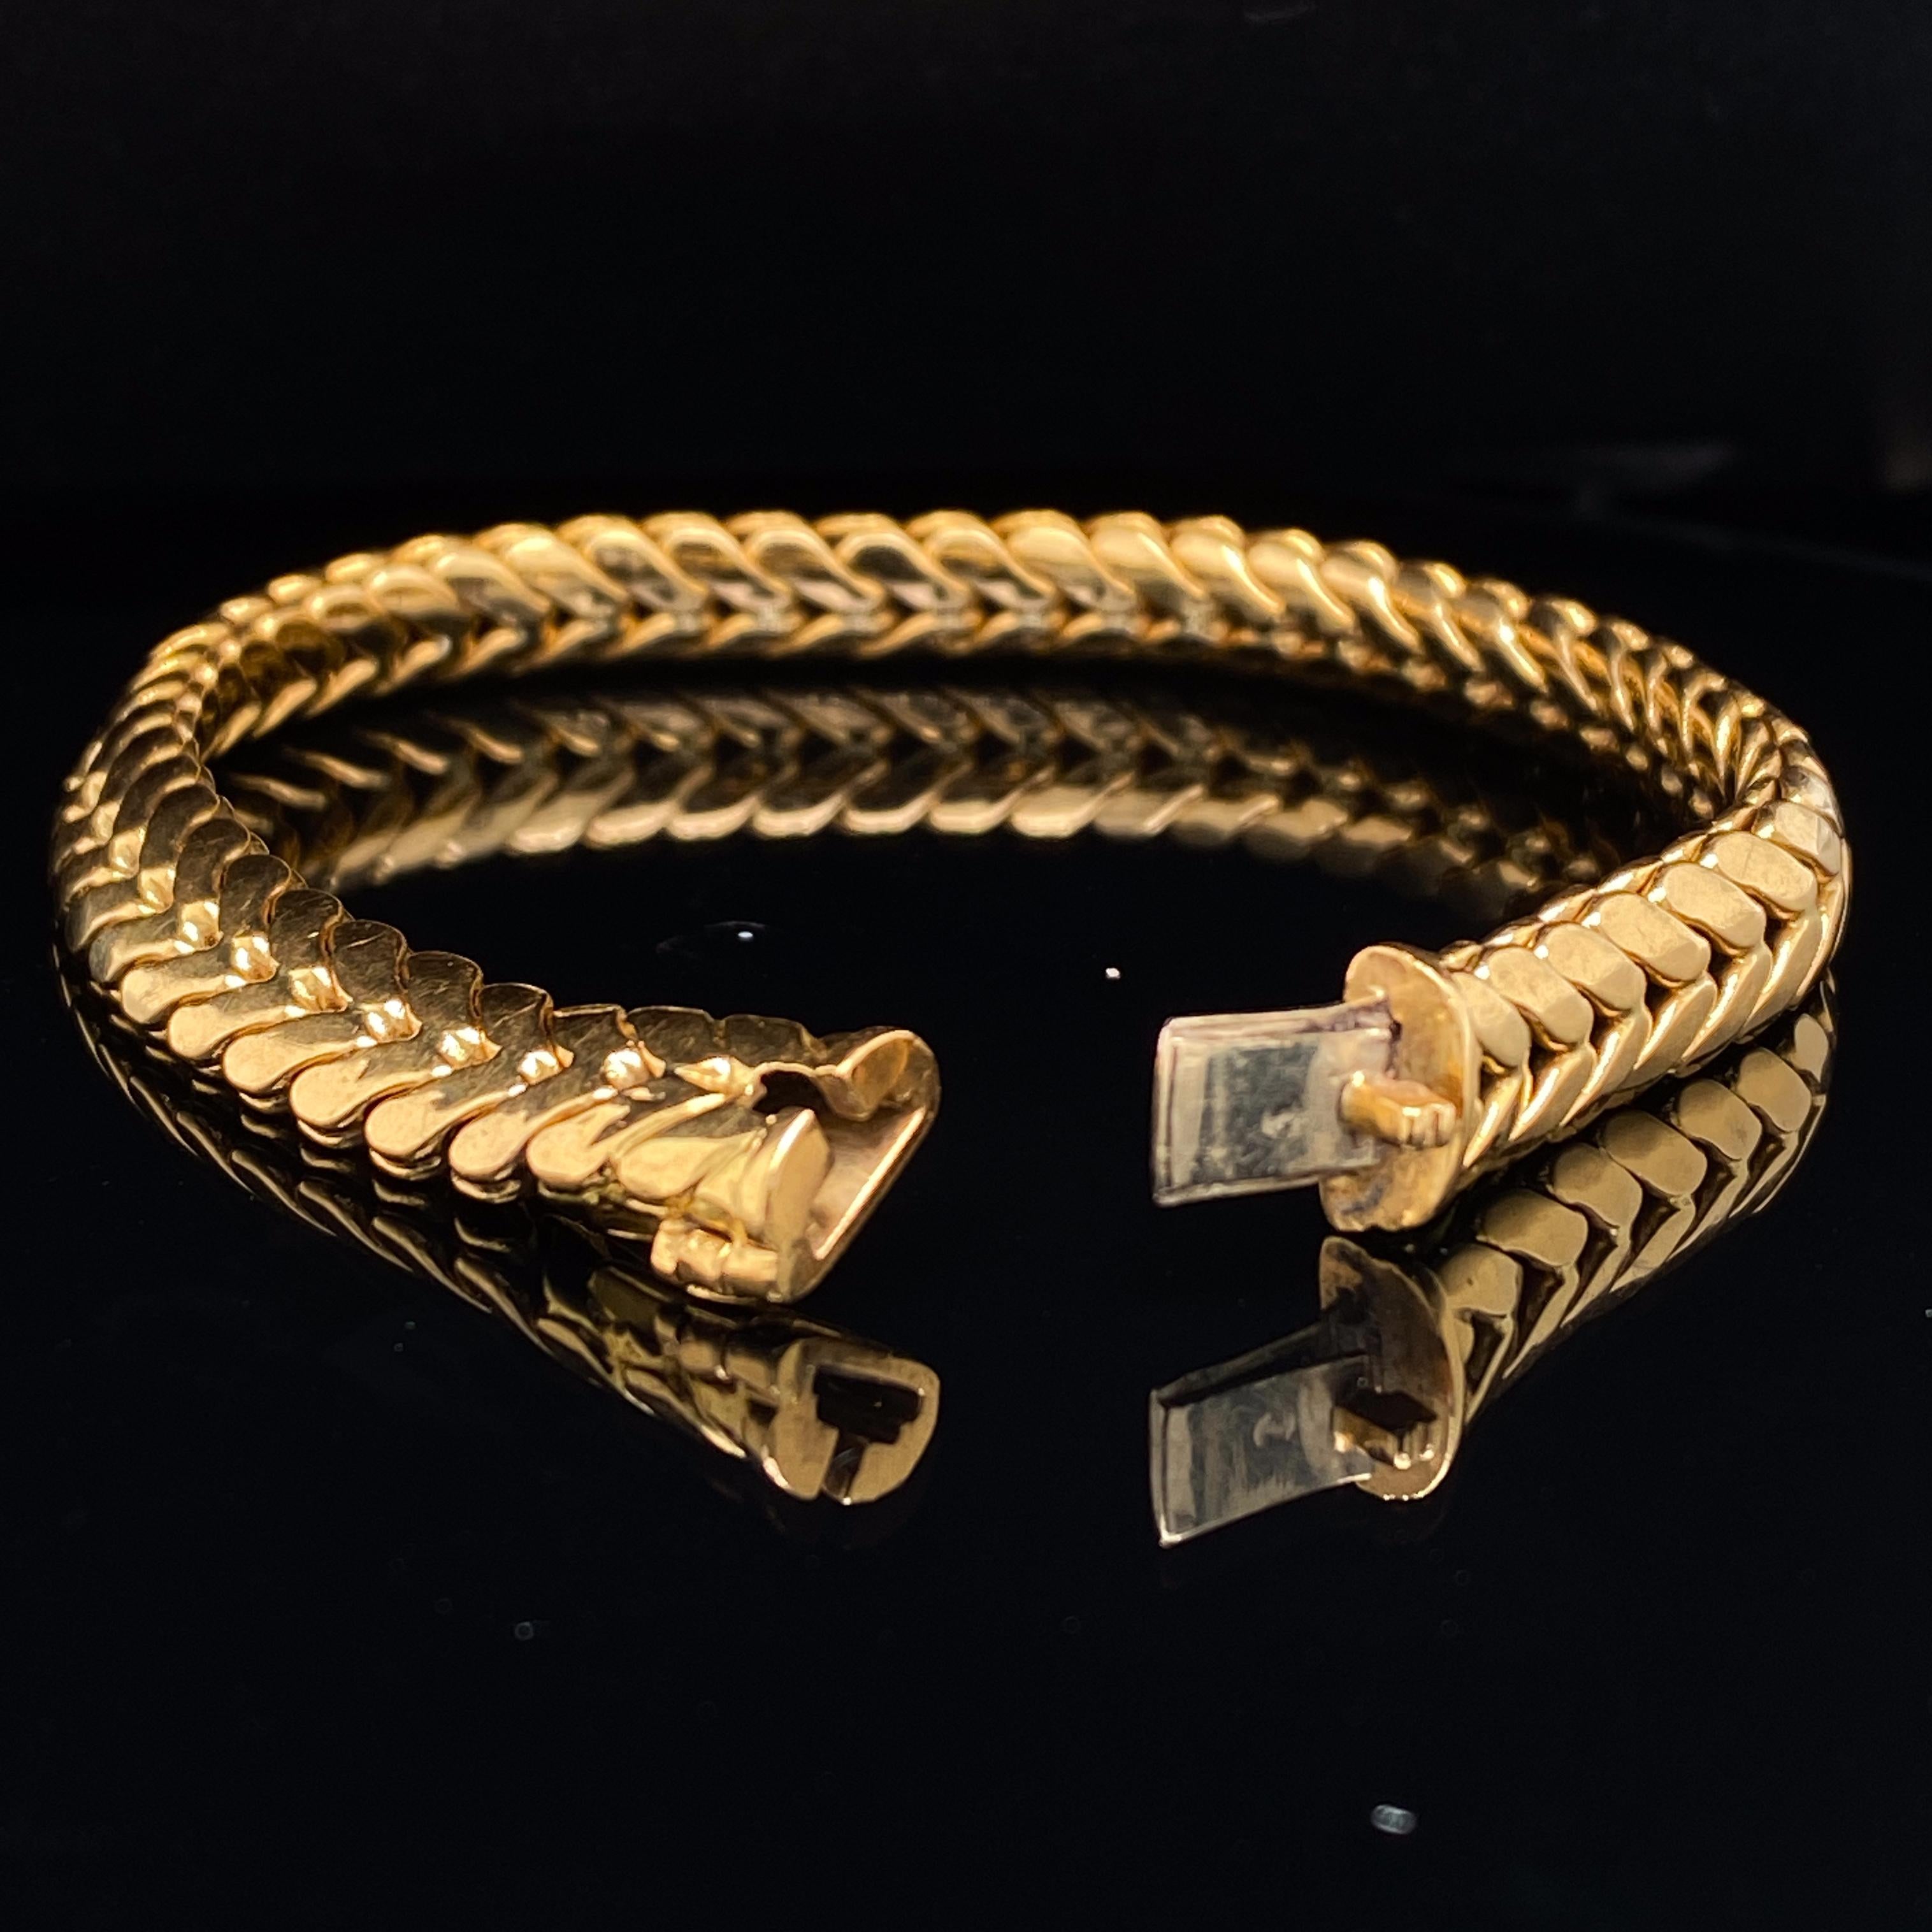 Van Cleef and Arpels 18 Karat Yellow Gold Bracelet Circa 1980

A timeless 18 karat yellow gold articulated bracelet of chevron design, with a snap fitting clasp.

An elegant, well made, everyday bracelet.

signed 